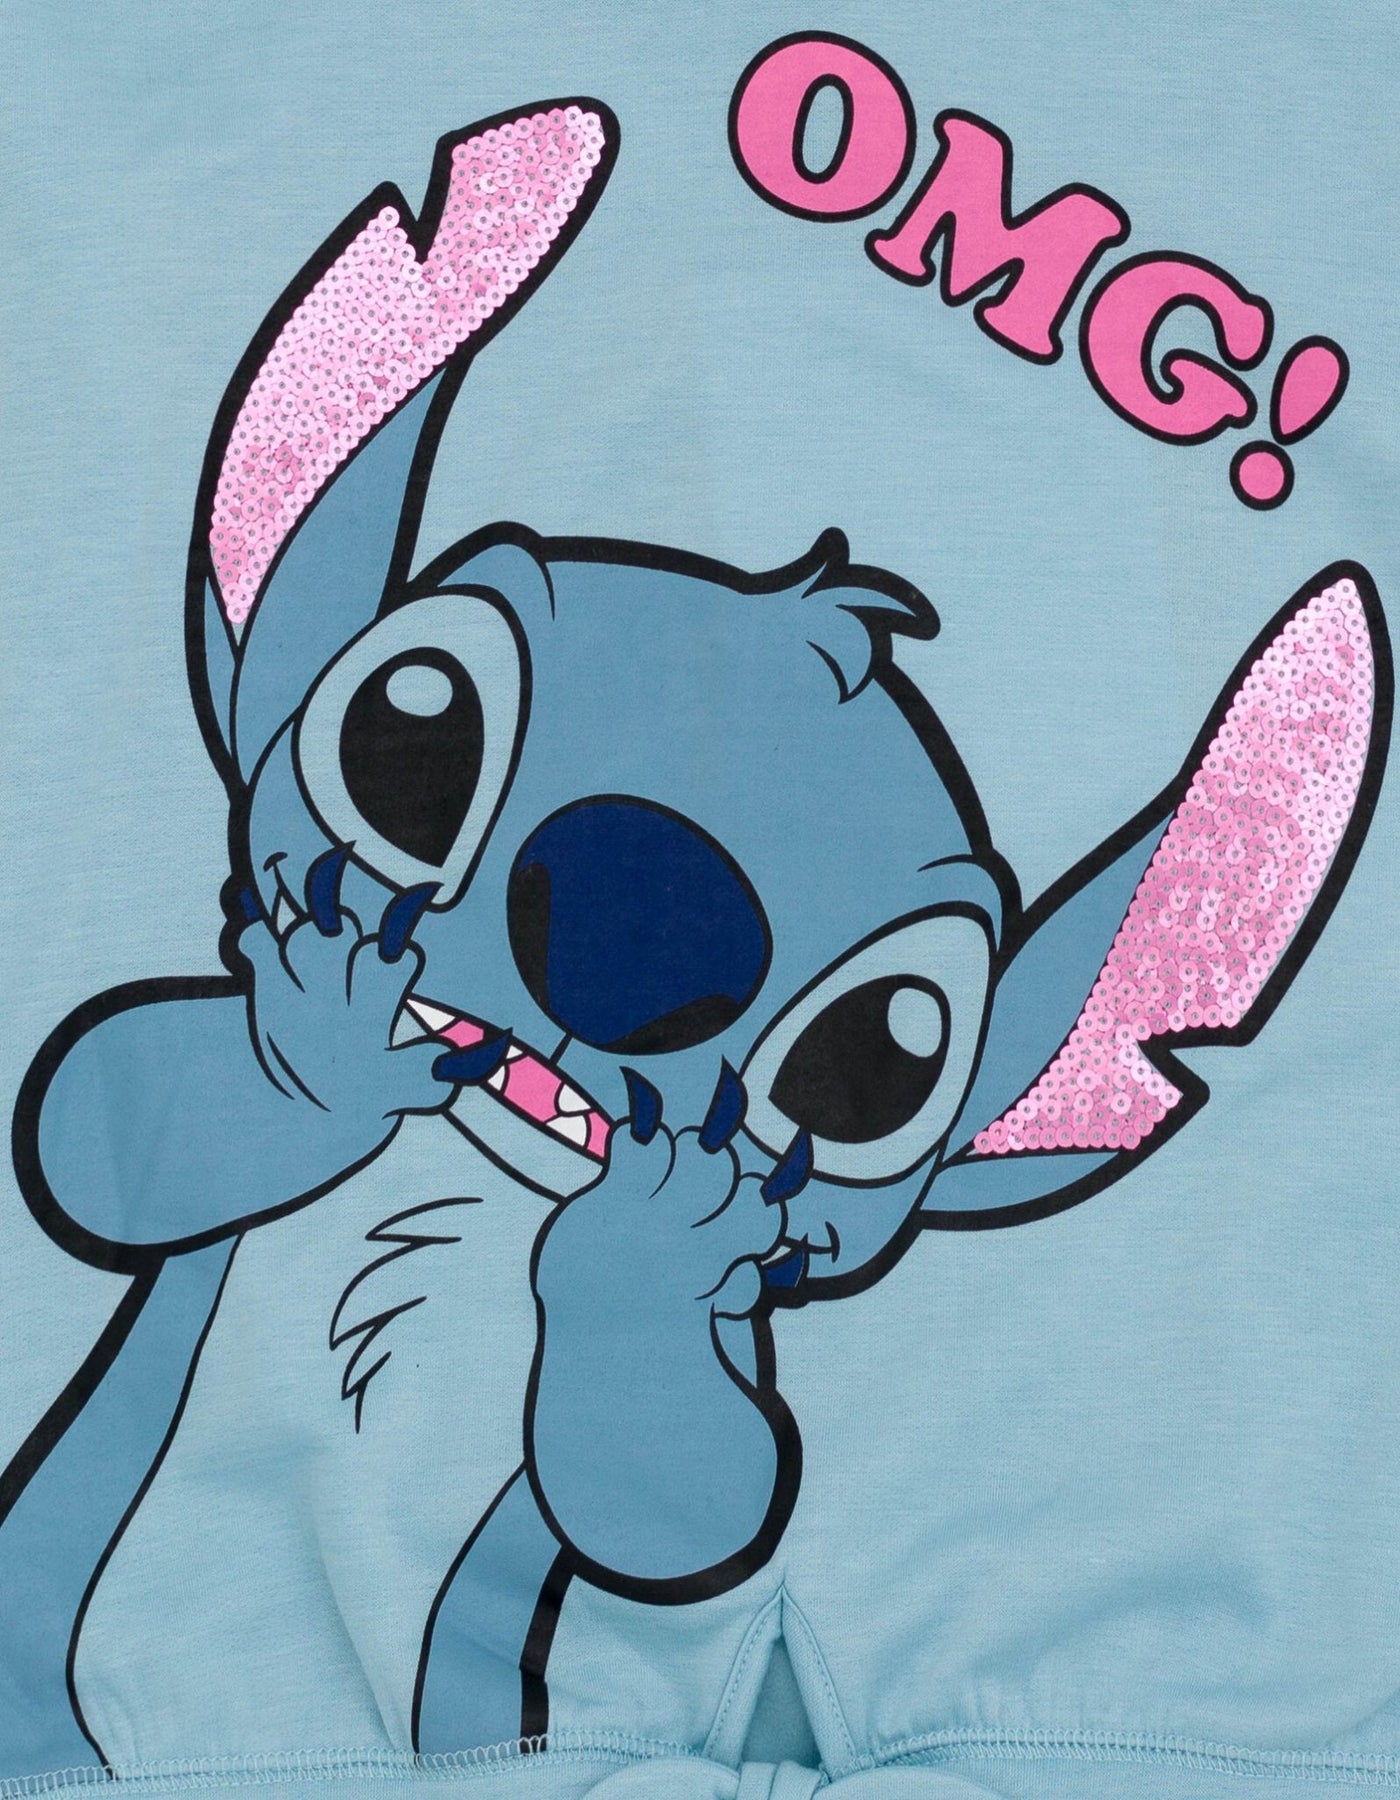 Disney Lilo & Stitch Stitch Pullover Fleece Hoodie and Leggings Outfit Set - imagikids